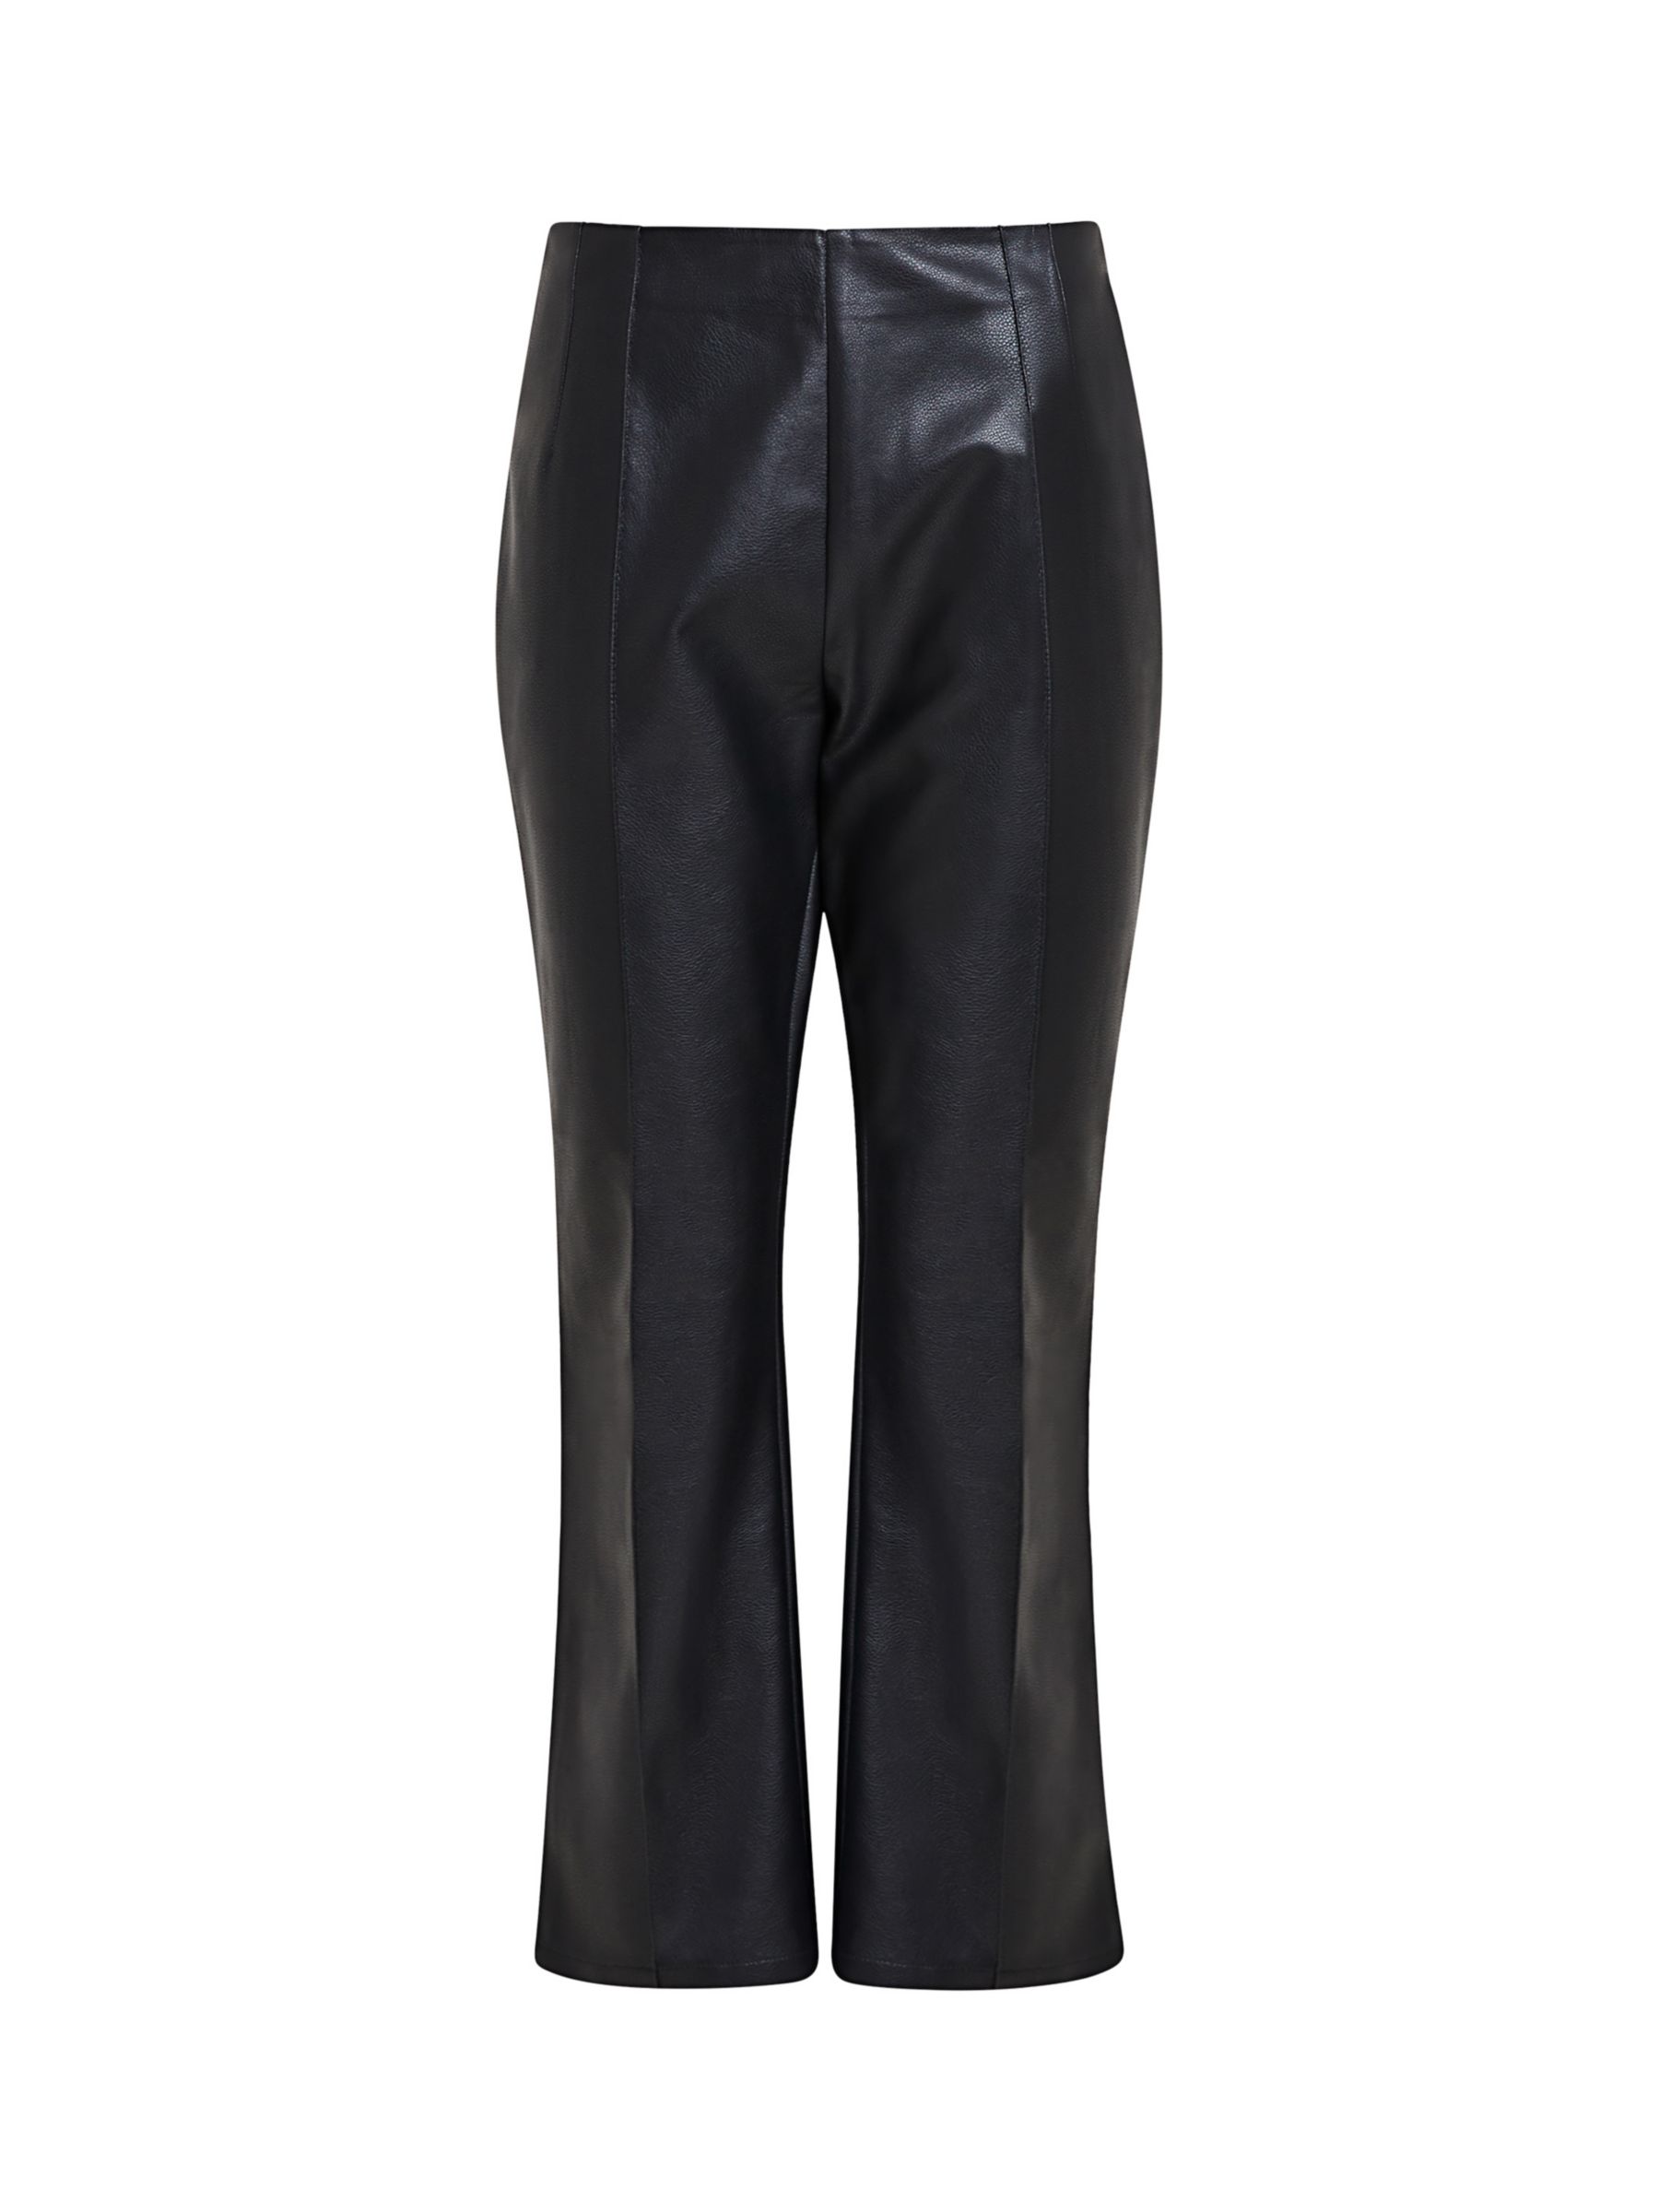 French Connection Claudia PU Strech Trouser, Blackout, 18